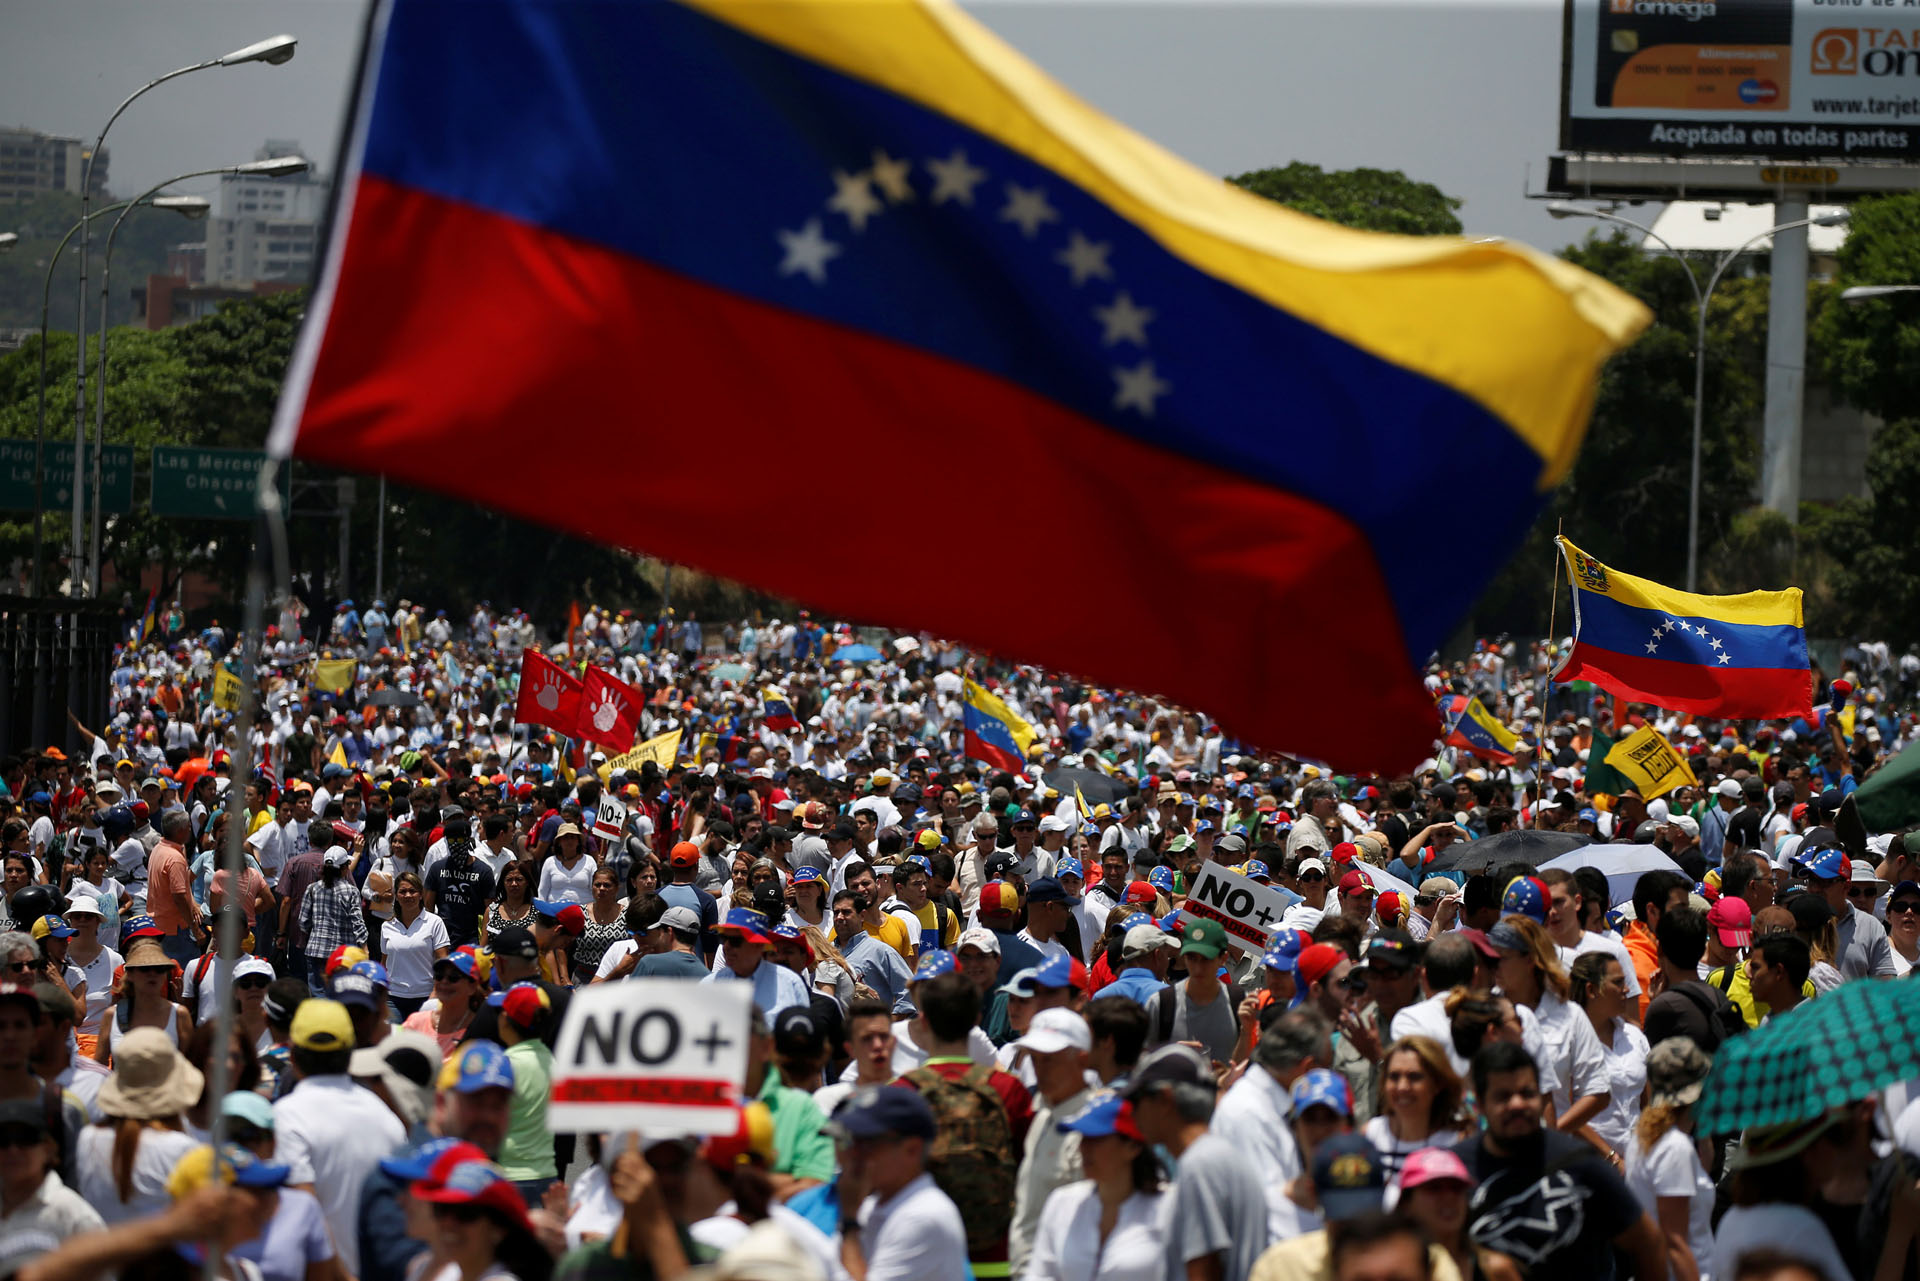 Demonstrators march during an opposition rally in Caracas, Venezuela April 6, 2017. REUTERS/Carlos Garcia Rawlins